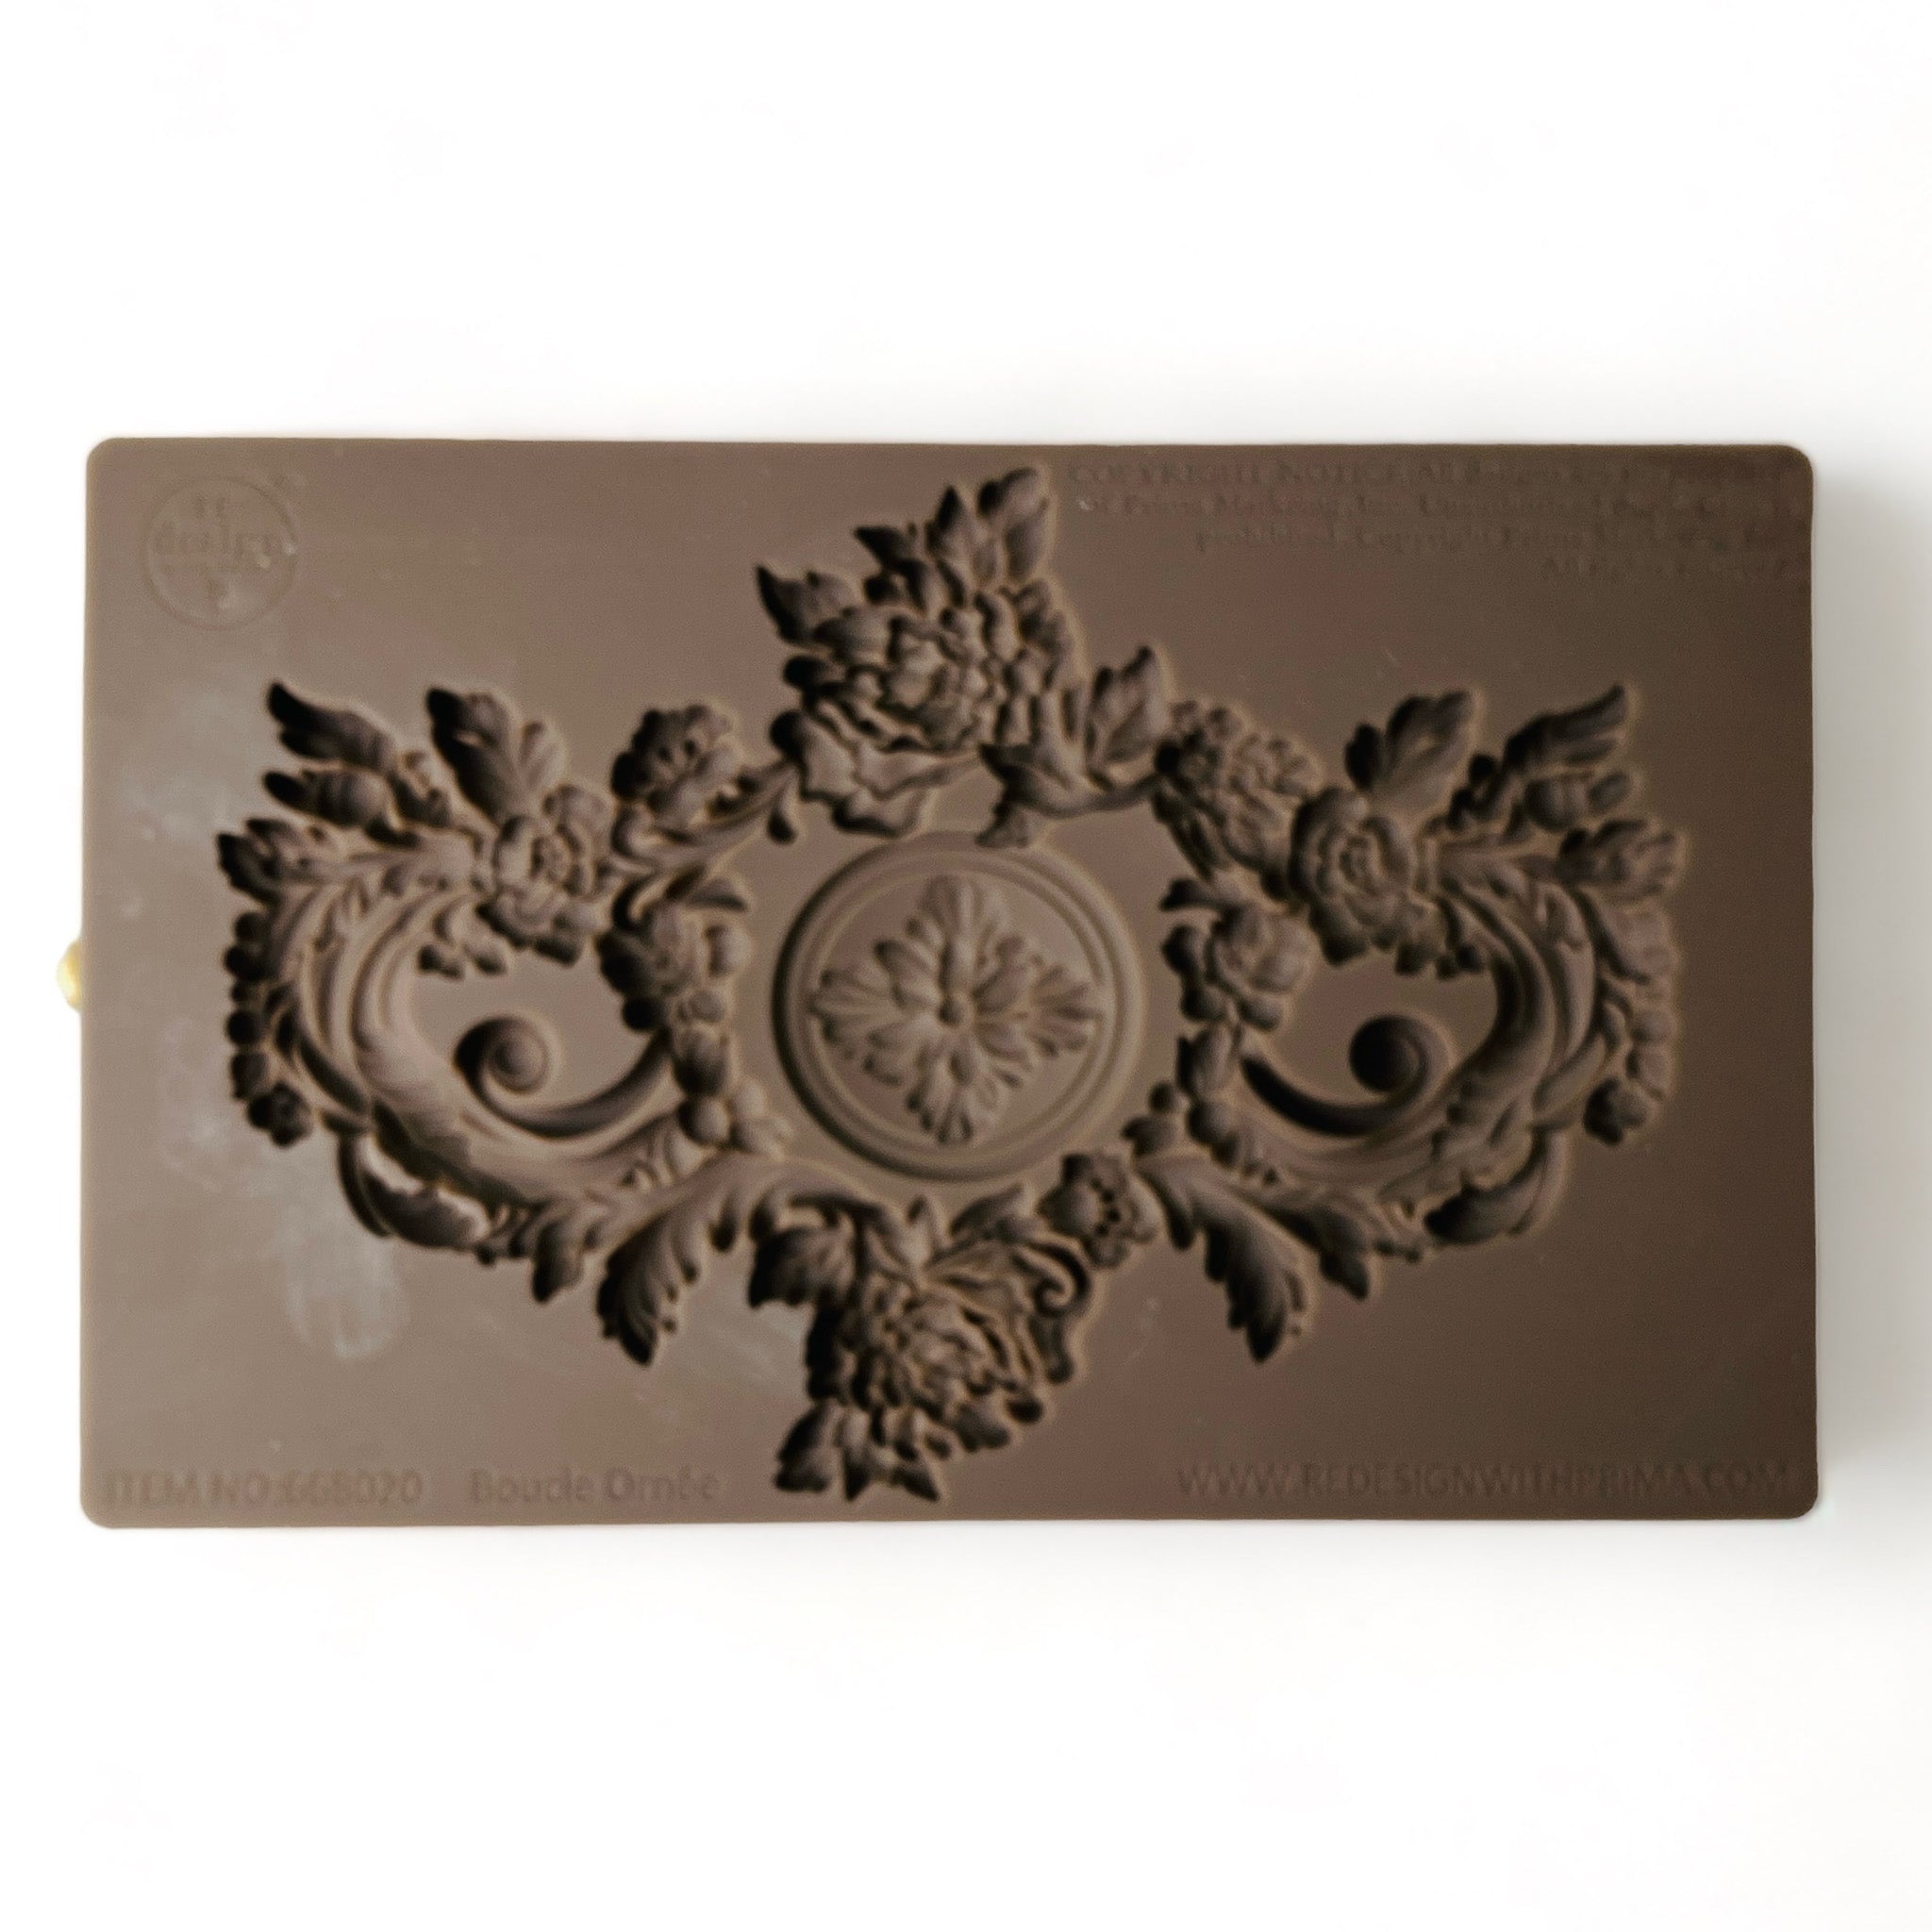 A brown silicone mold of a large ornate floral accented medallion center piece are against a white background.